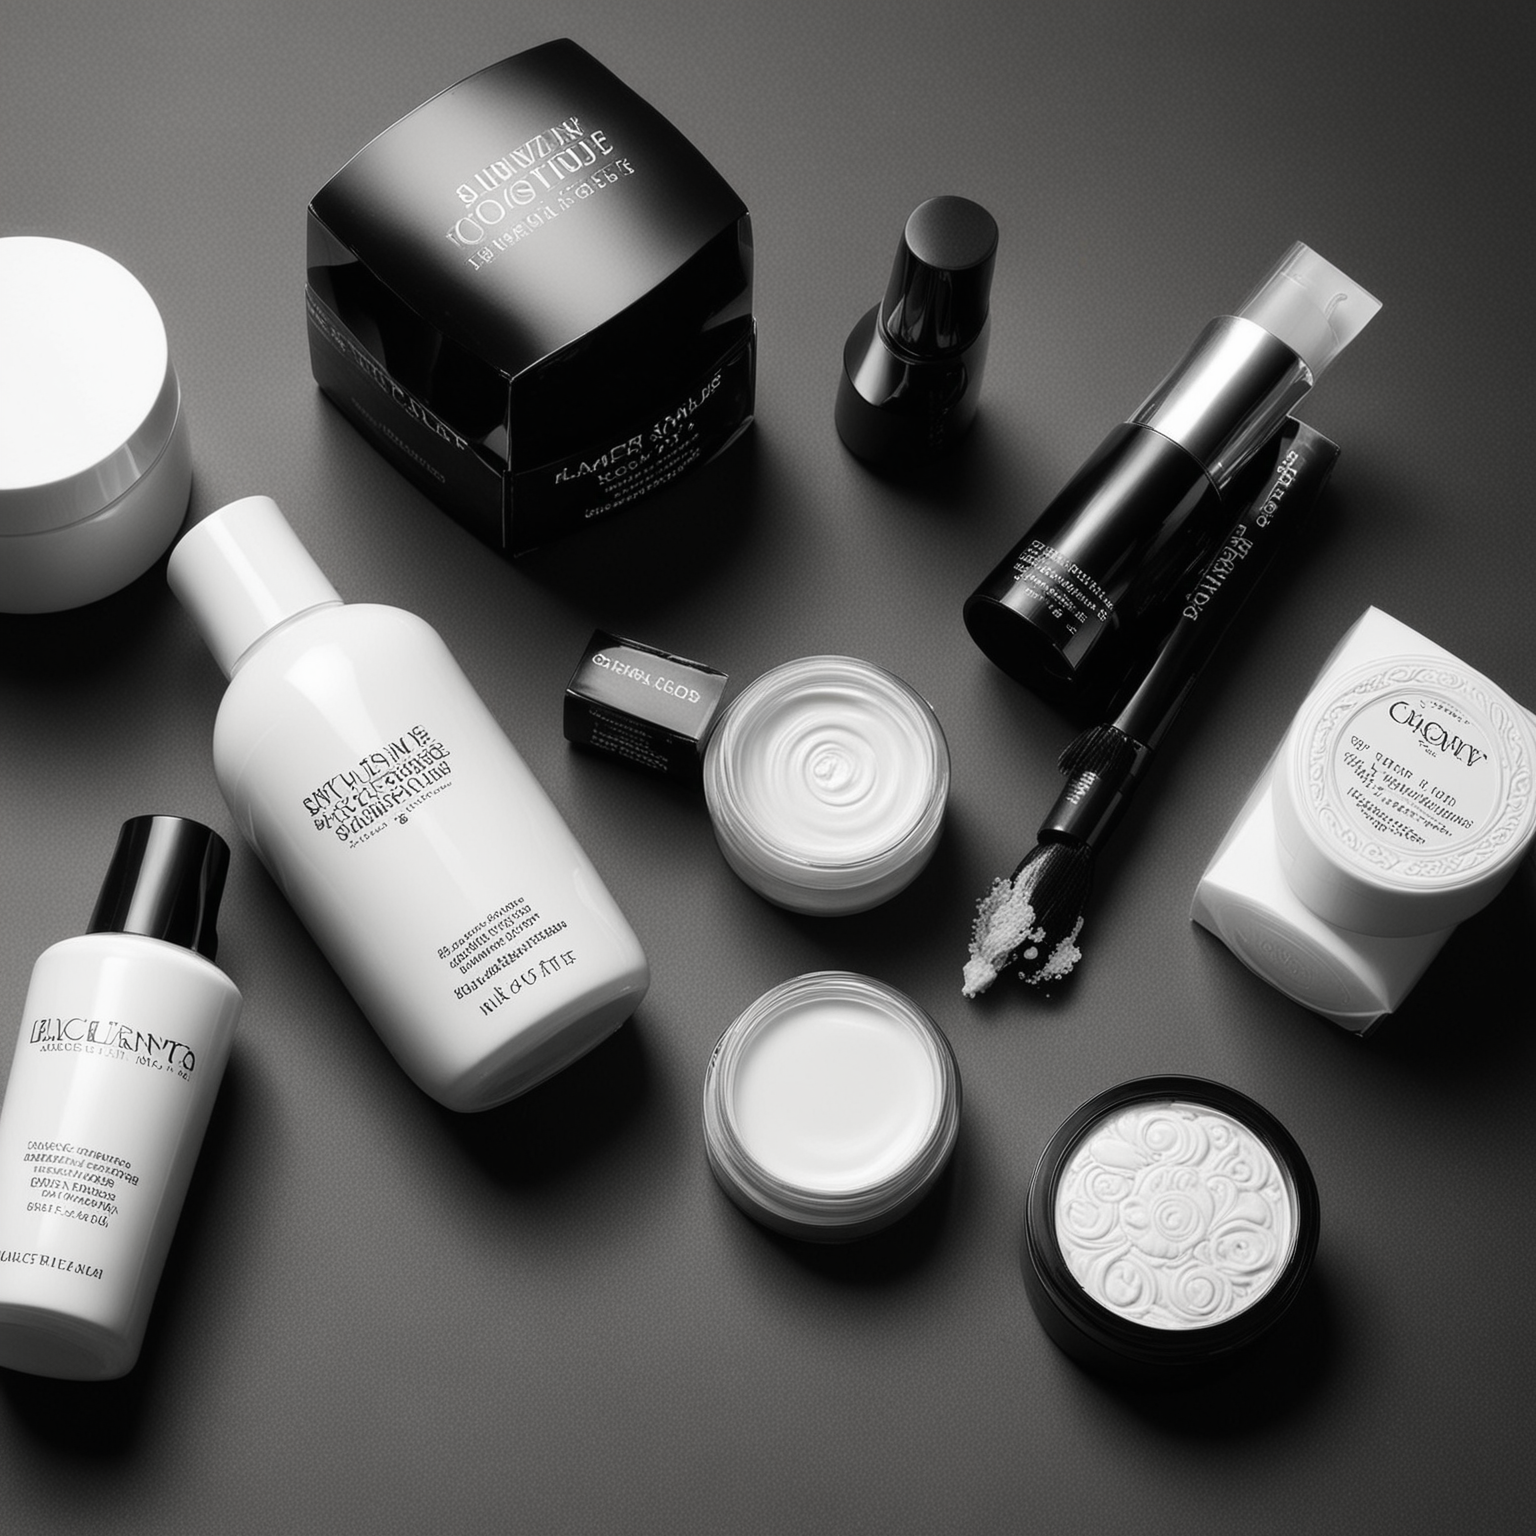 luxury black and white beauty products

